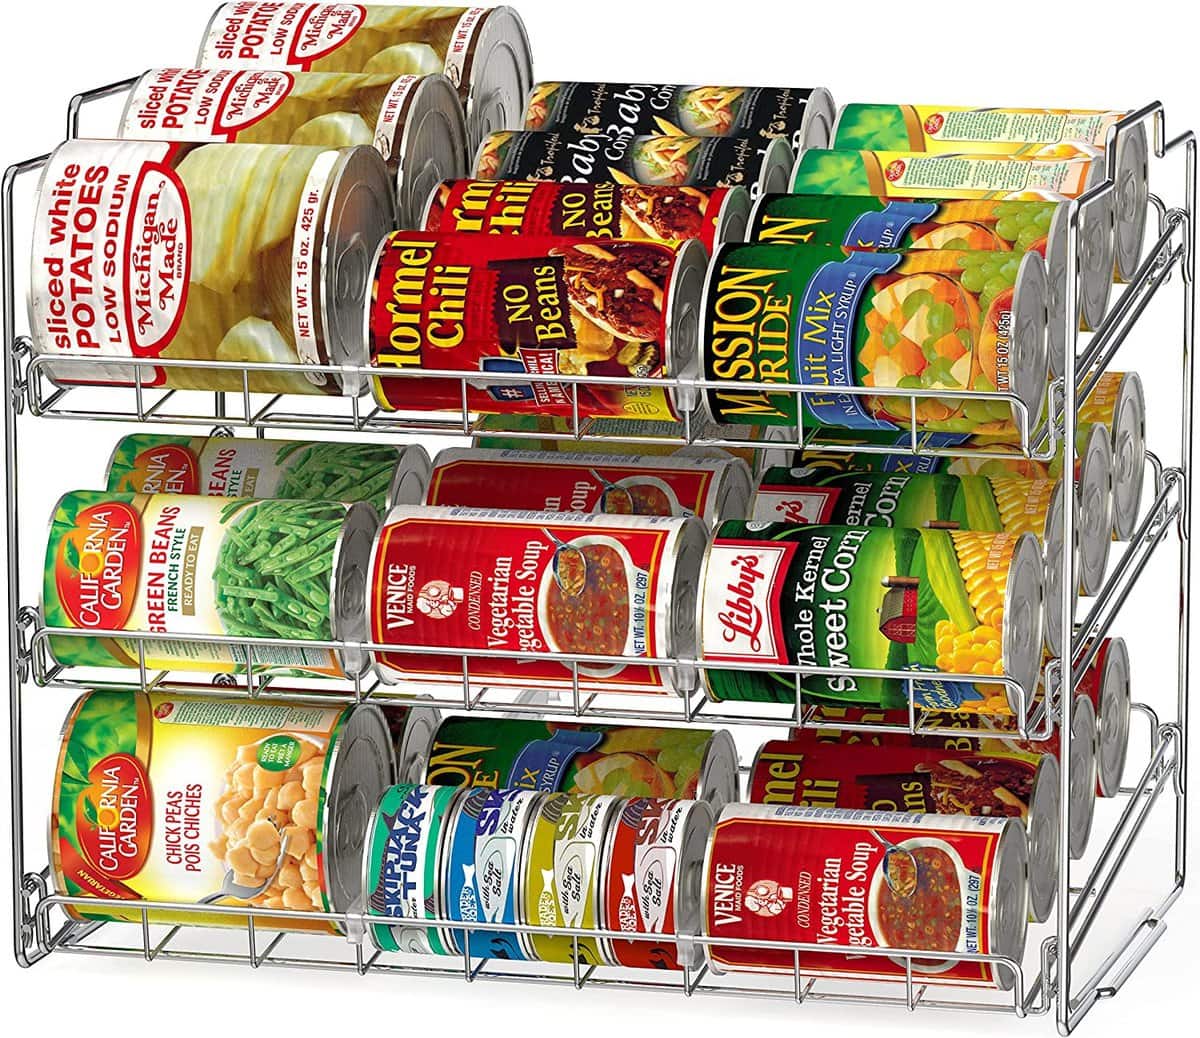 Pantry Organization Ideas - 3 tier metal can organizer that rotates cans.